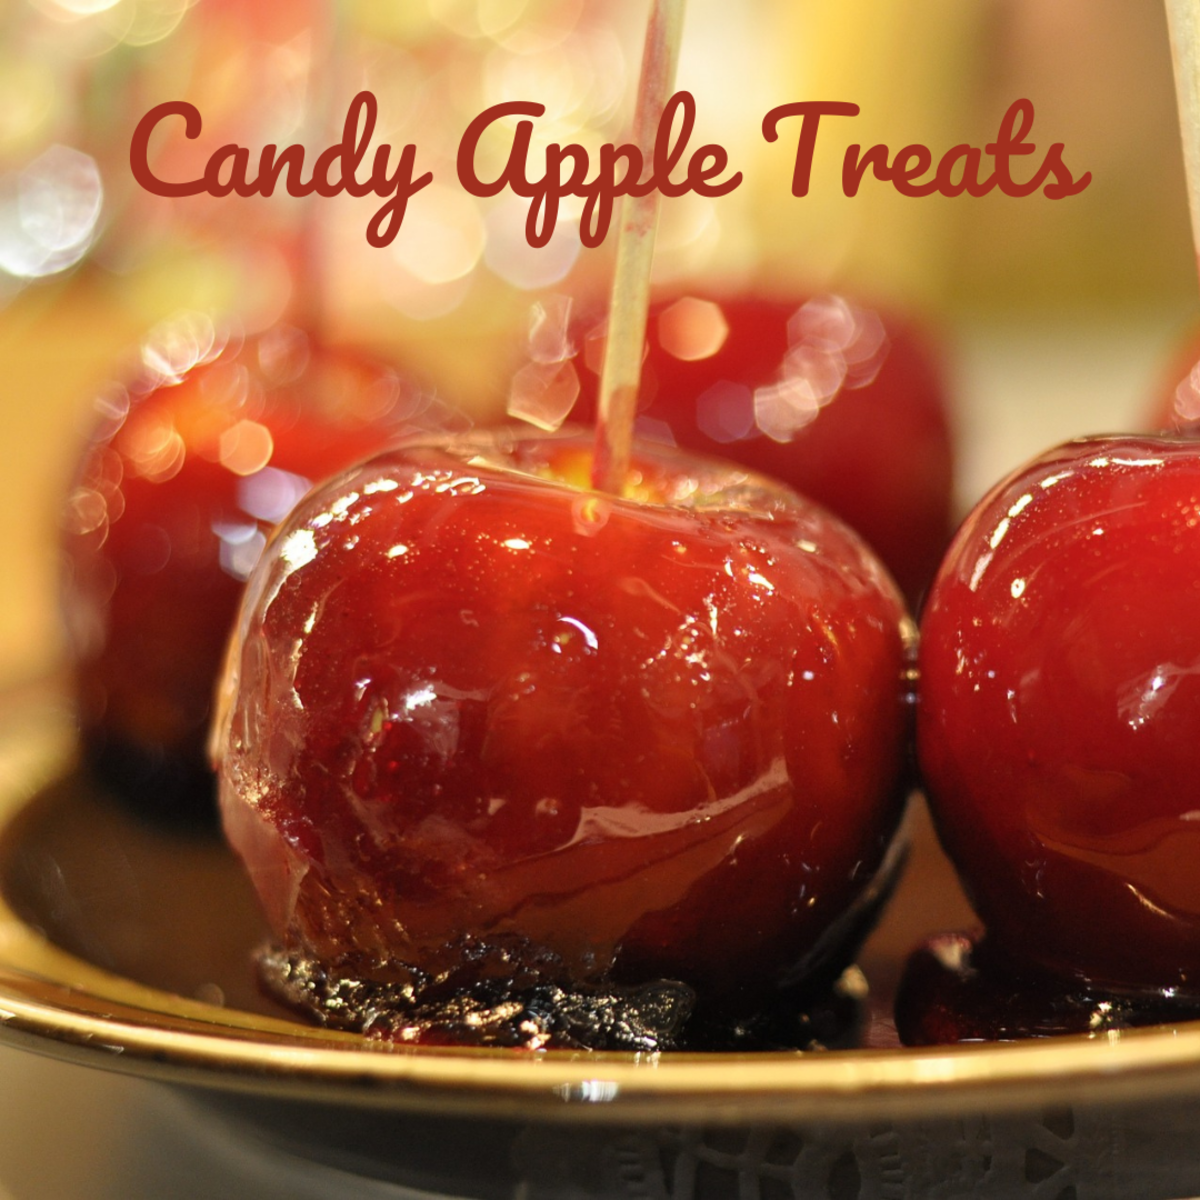 Making candy apples is really not that hard, but there are some tips you need to know.